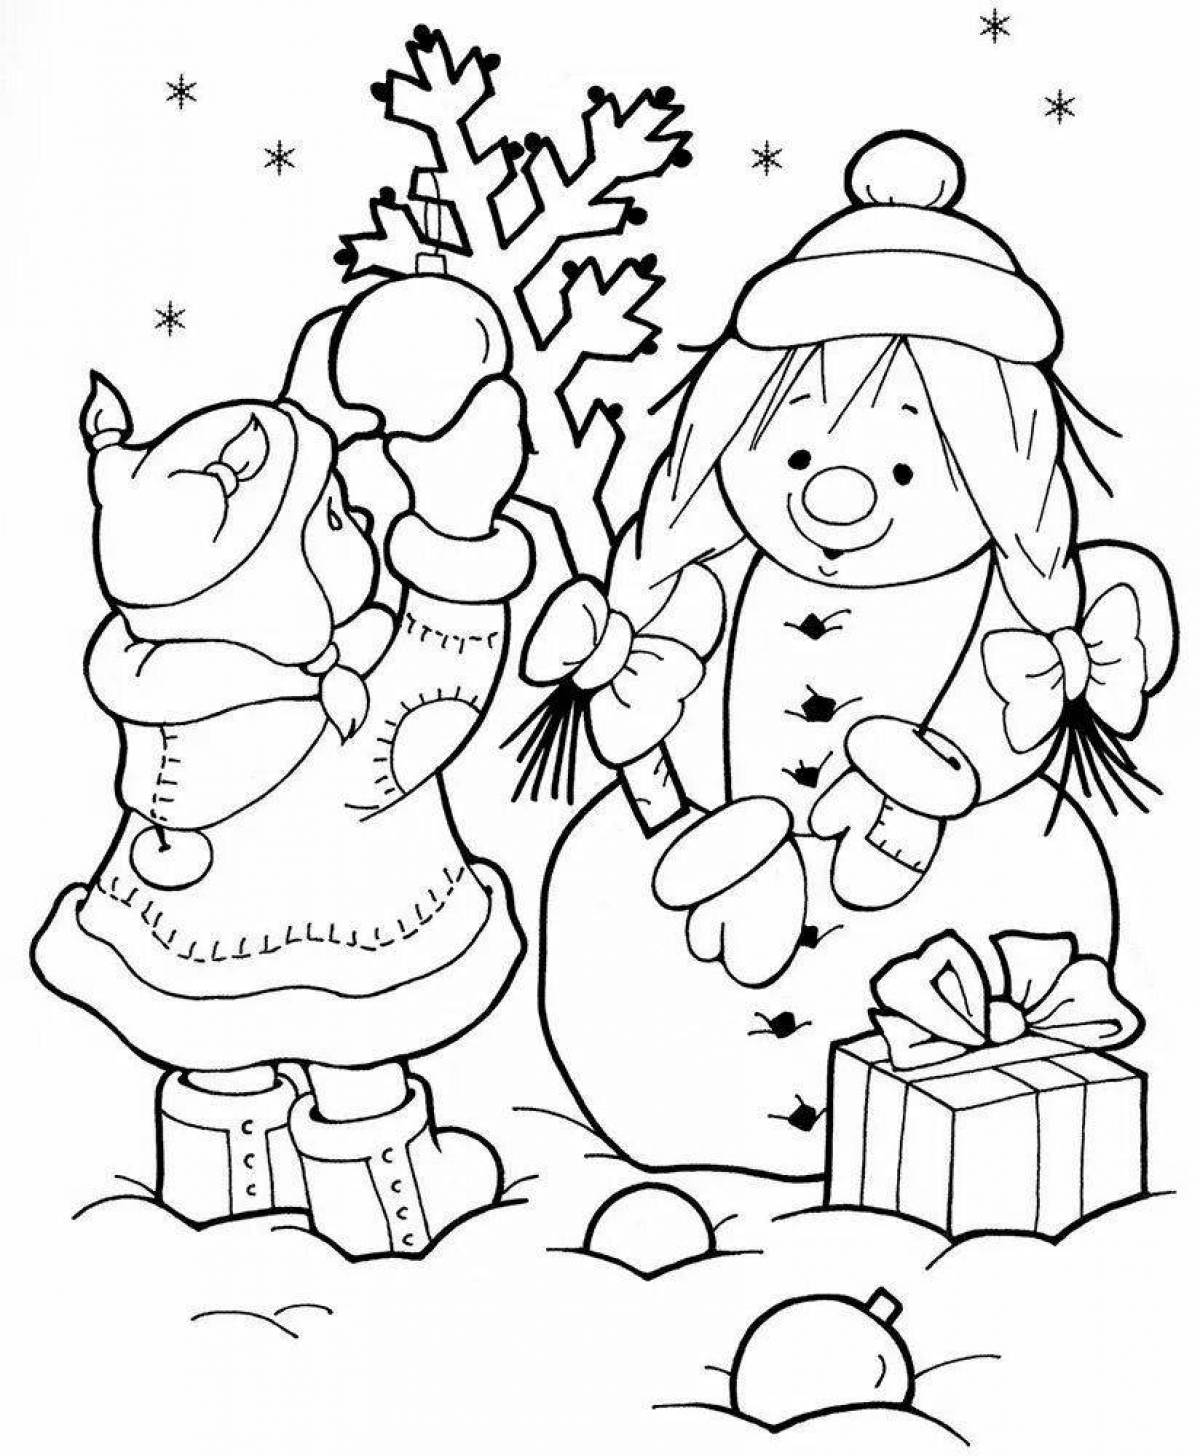 Joyful winter coloring book for children 6-7 years old